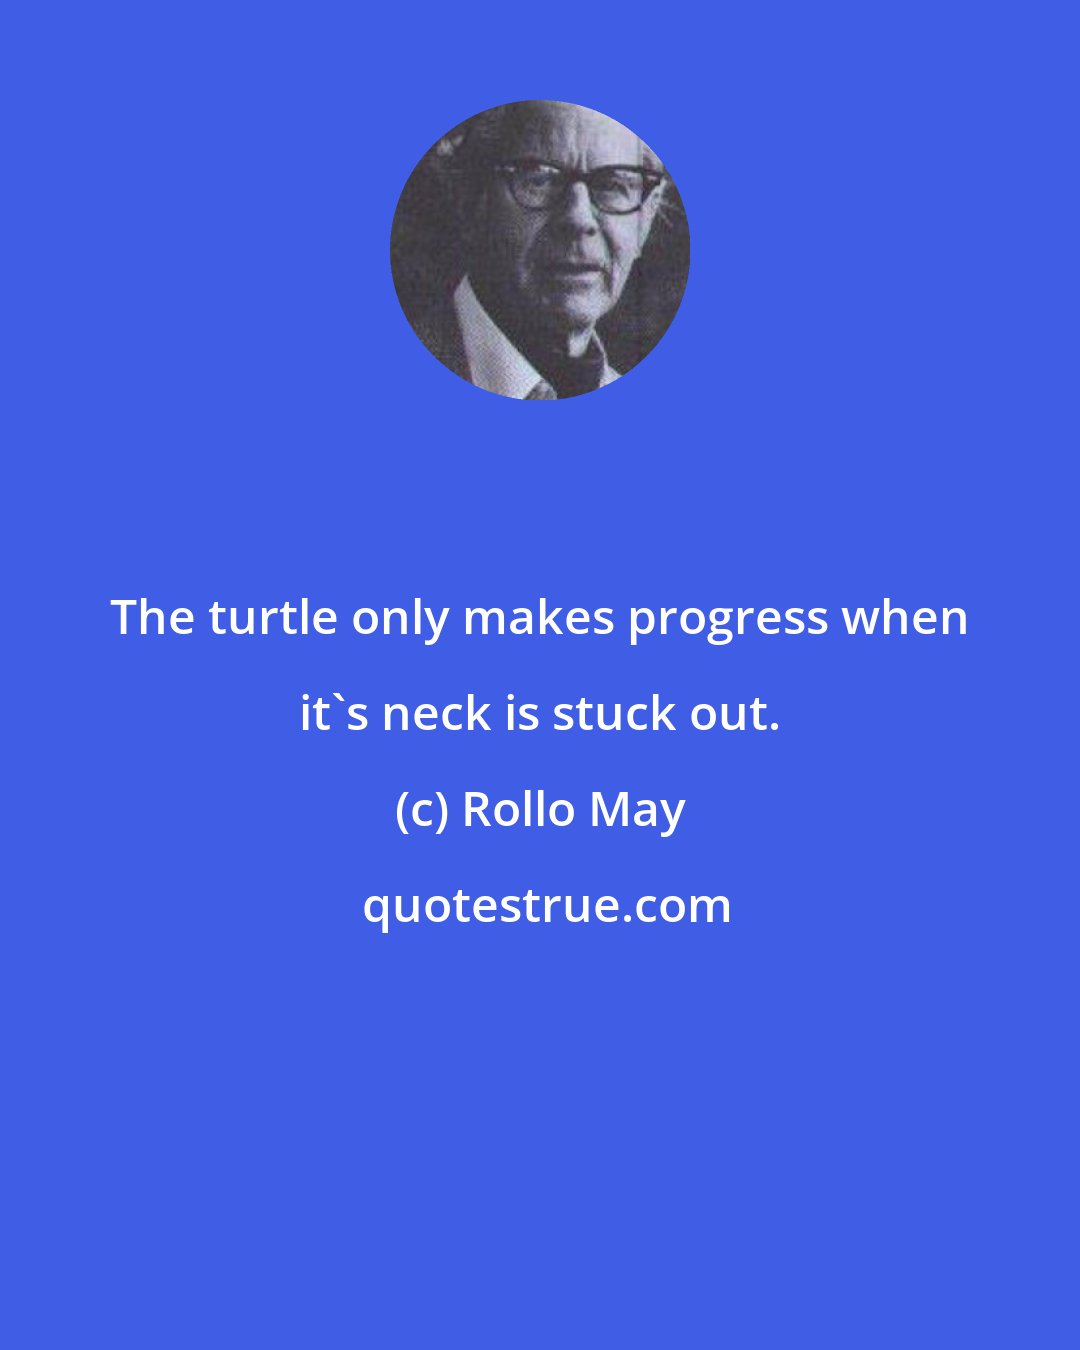 Rollo May: The turtle only makes progress when it's neck is stuck out.